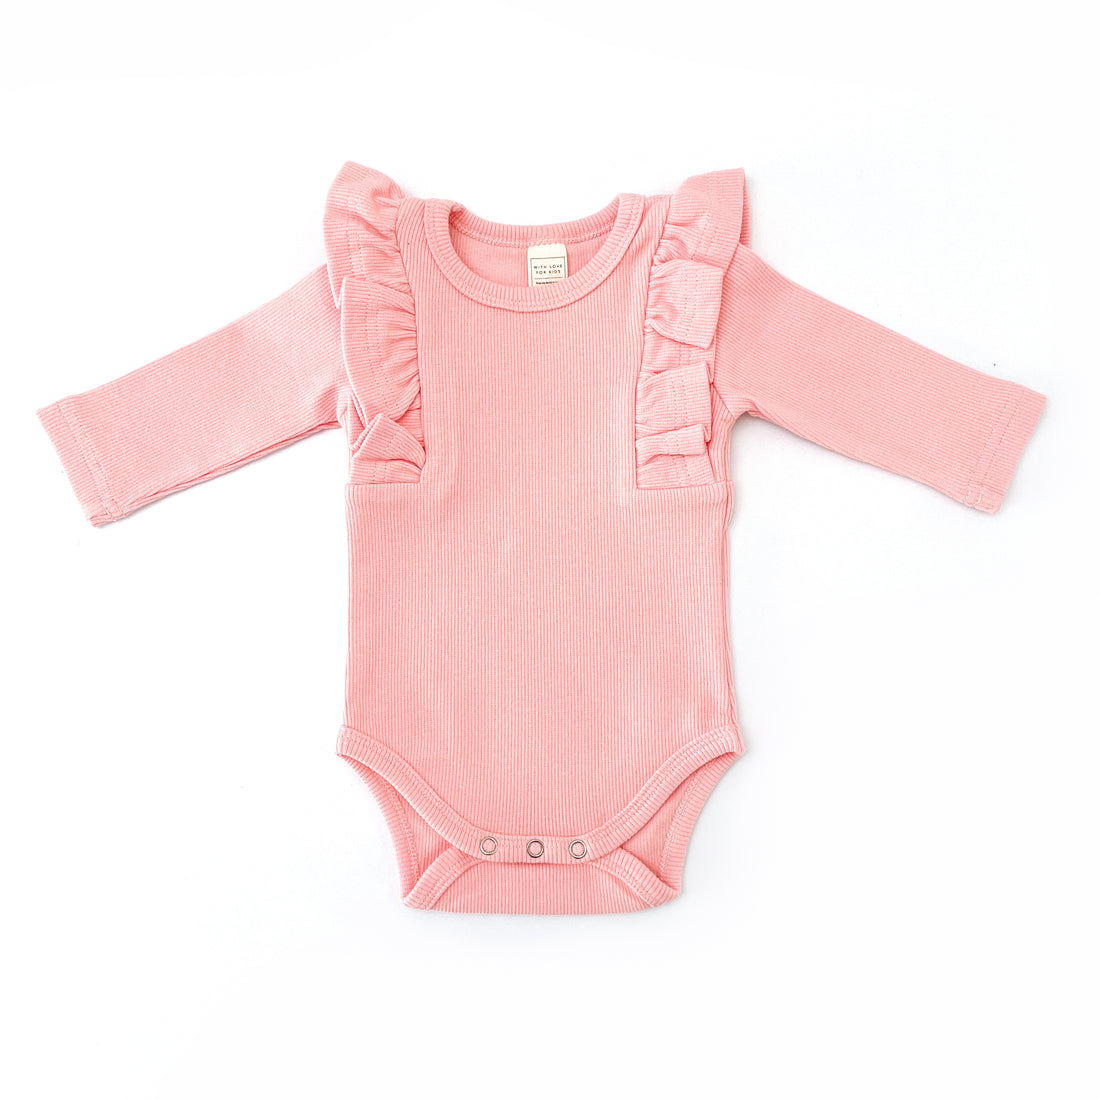 BASICS THICK Shimmy Ribbed Long Sleeve Onesie/Top - DREAMY PEACH